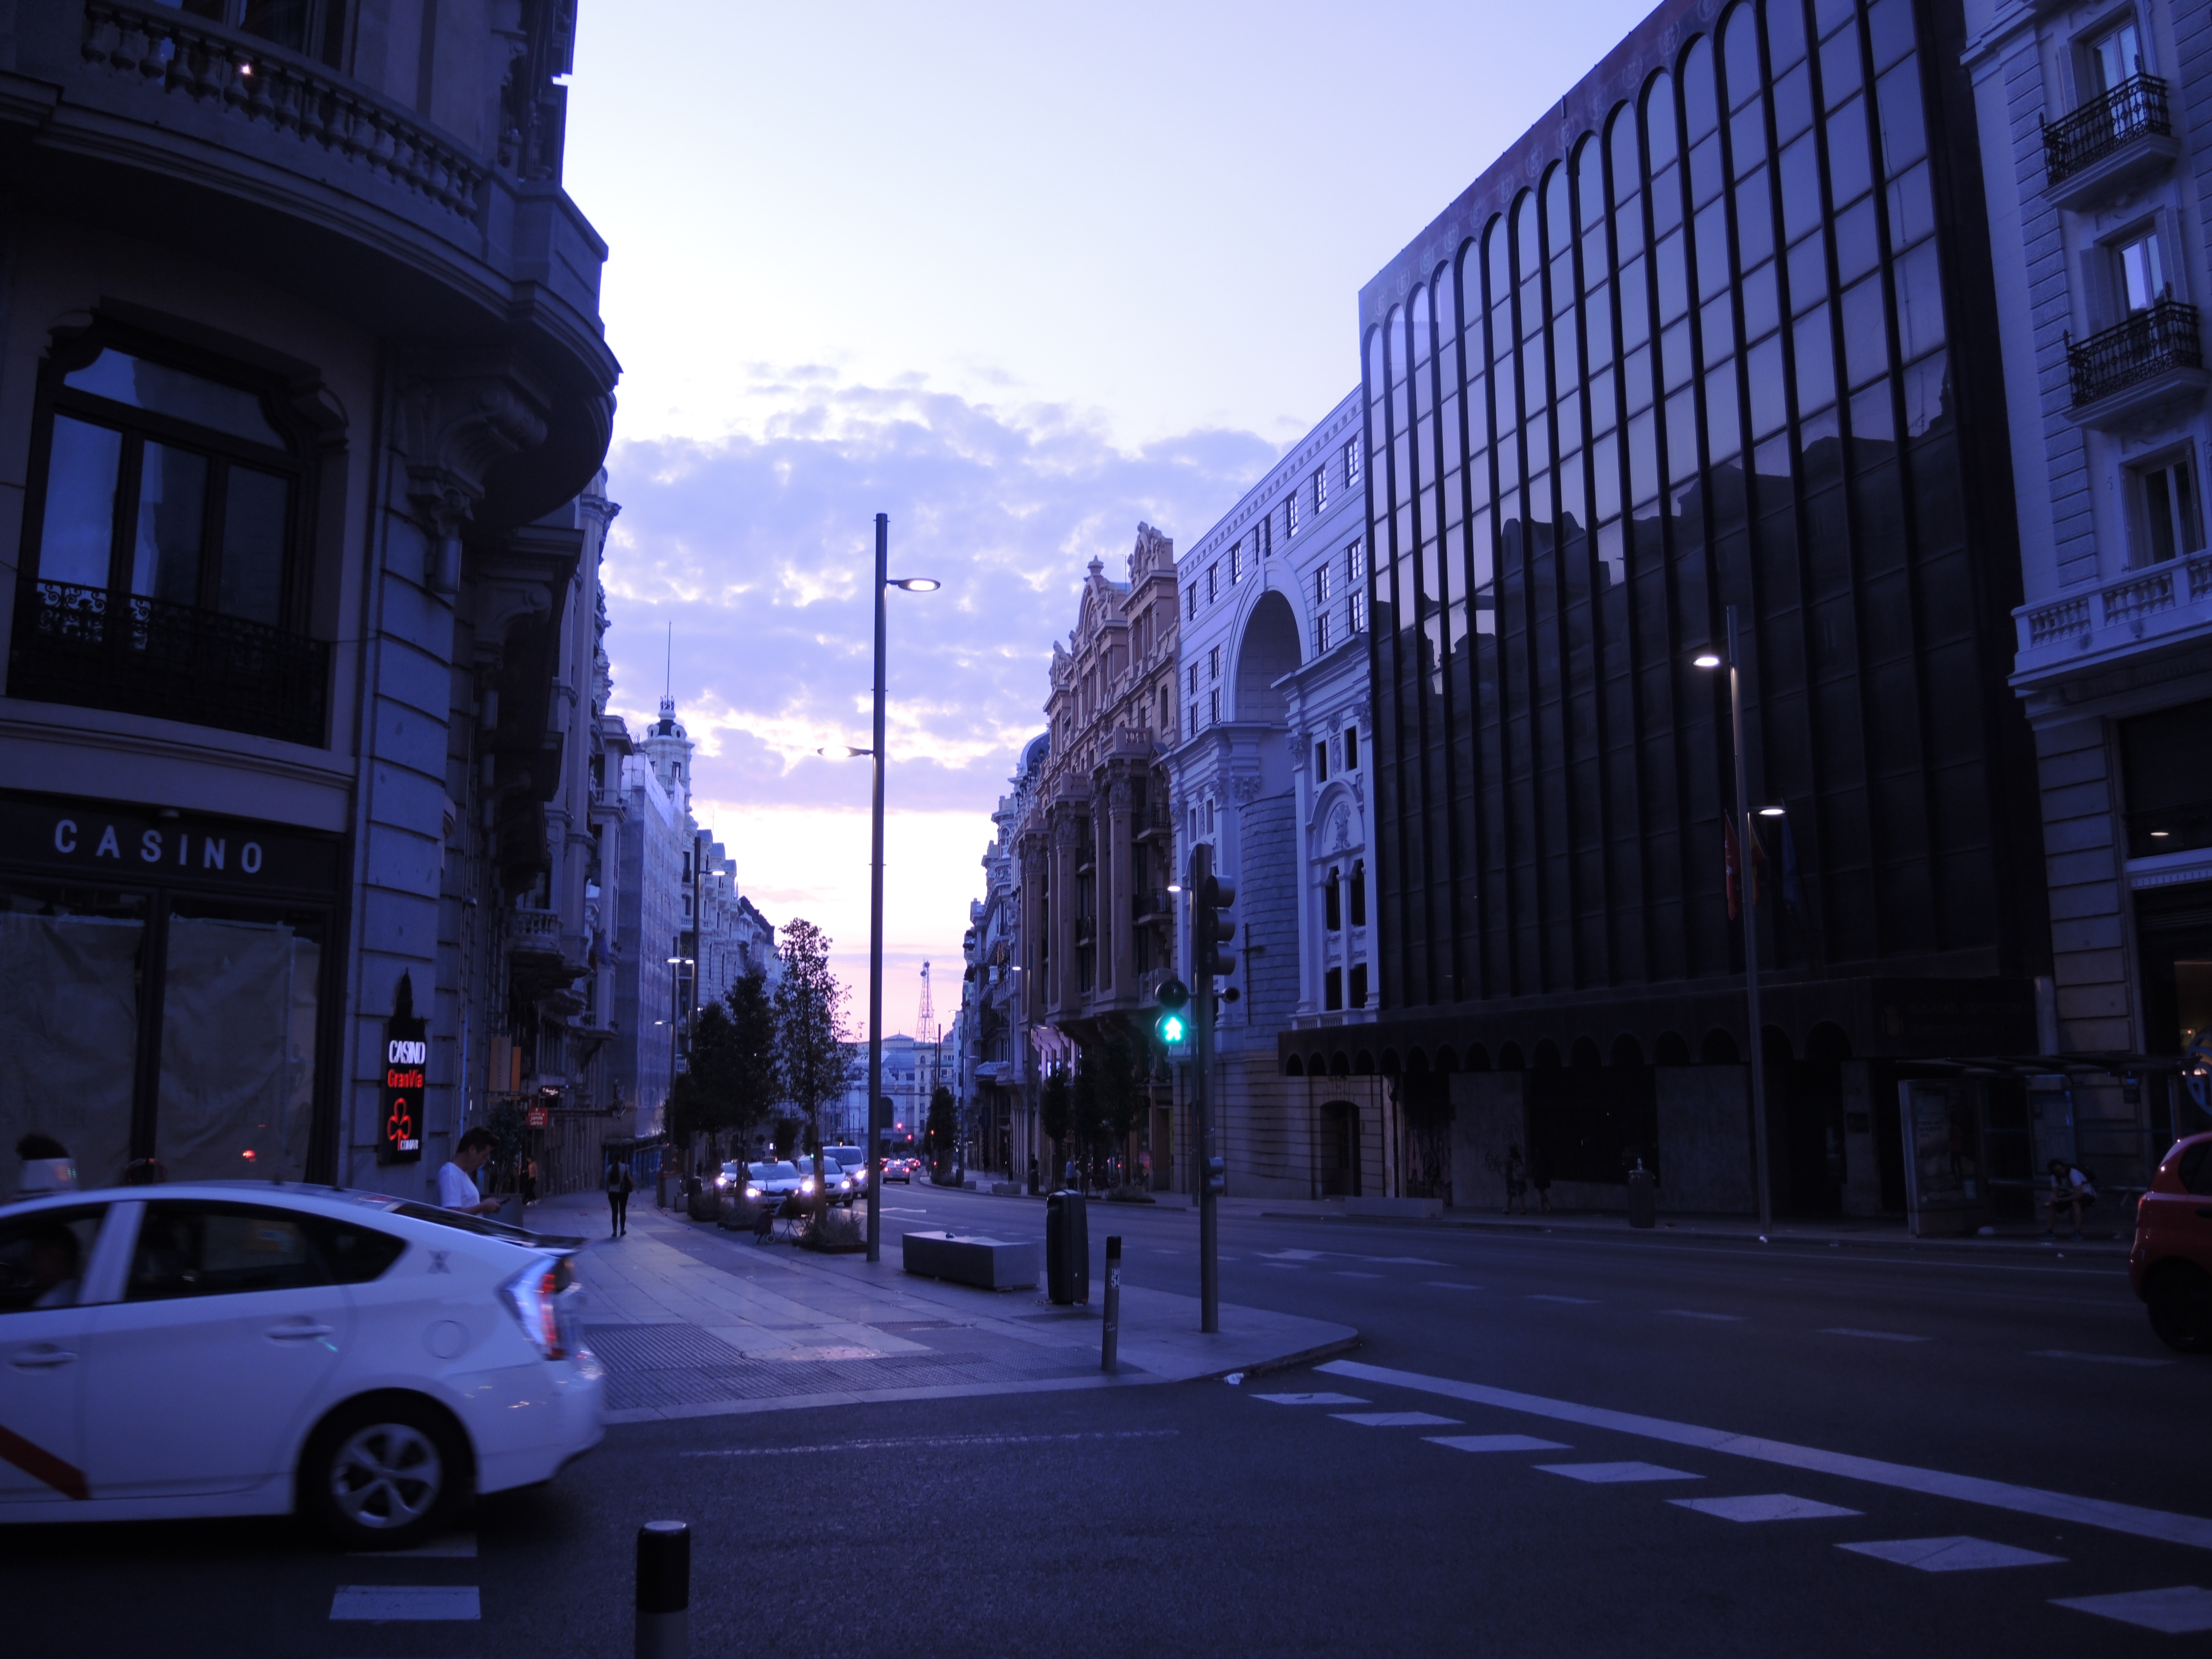 Madrid in the Morning